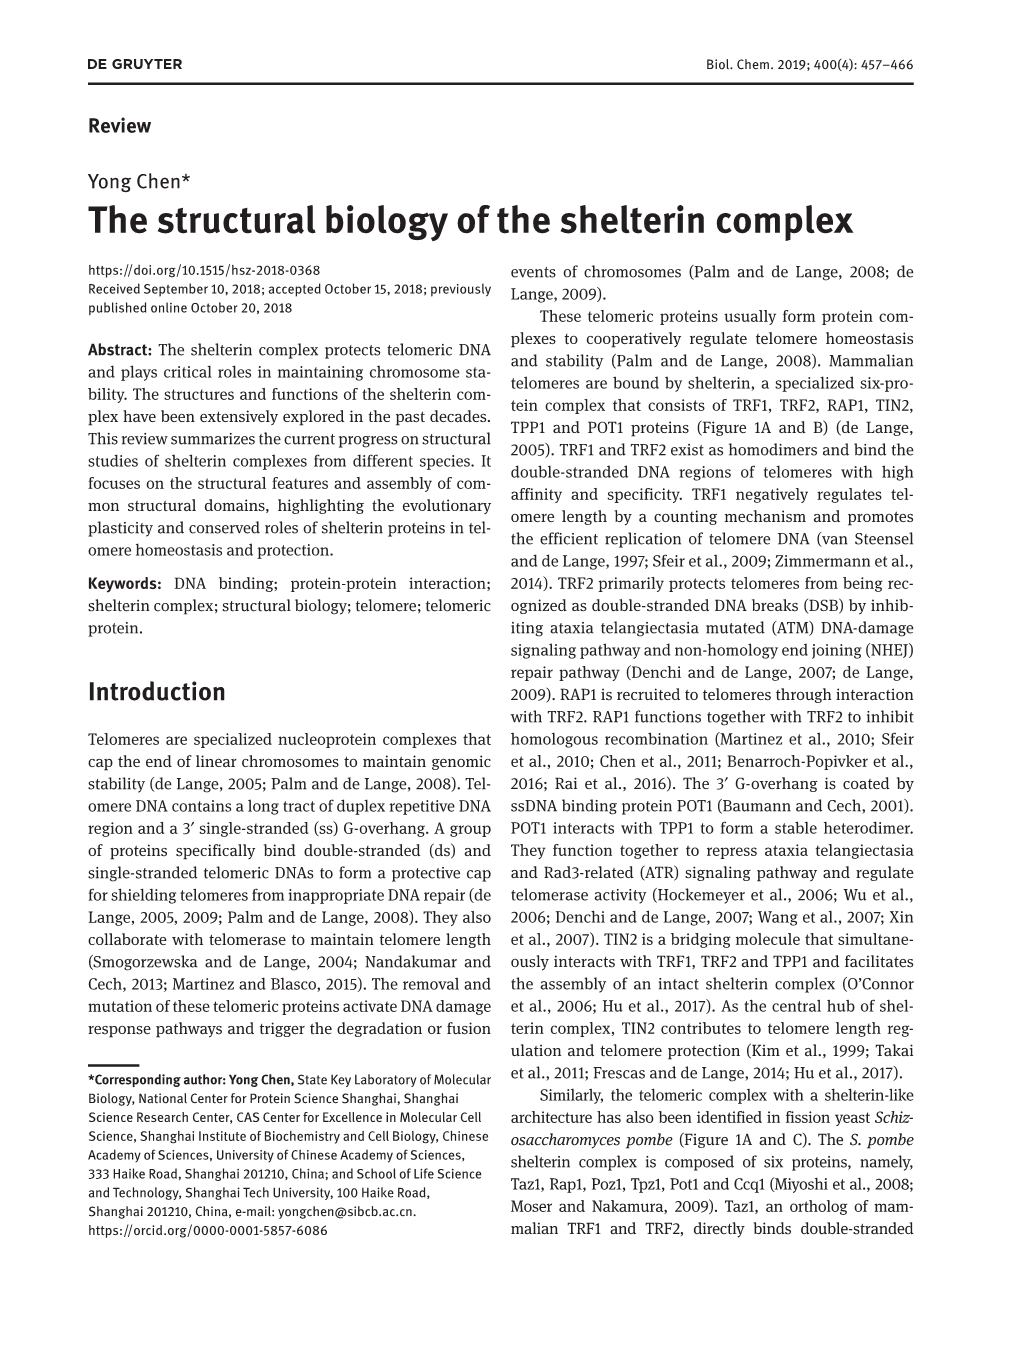 The Structural Biology of the Shelterin Complex